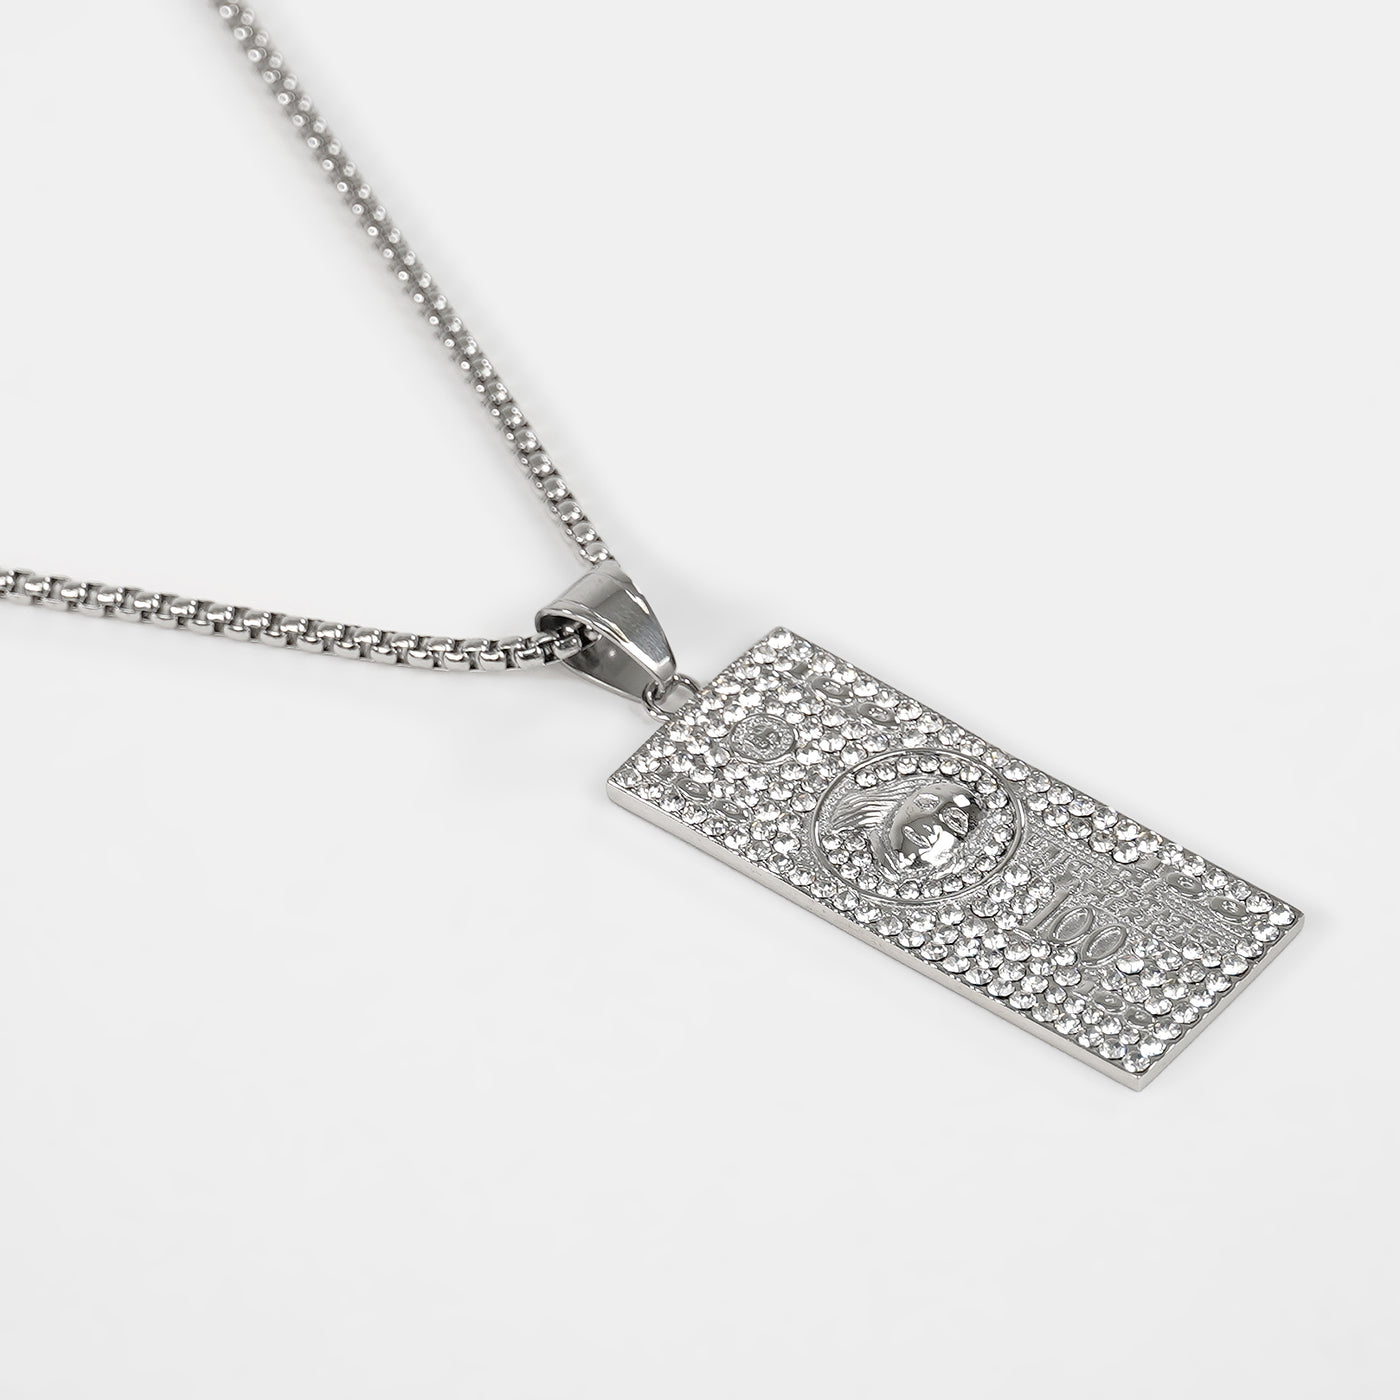 Silver 100 Bill Money Benjamin Pendant with Chain Necklace